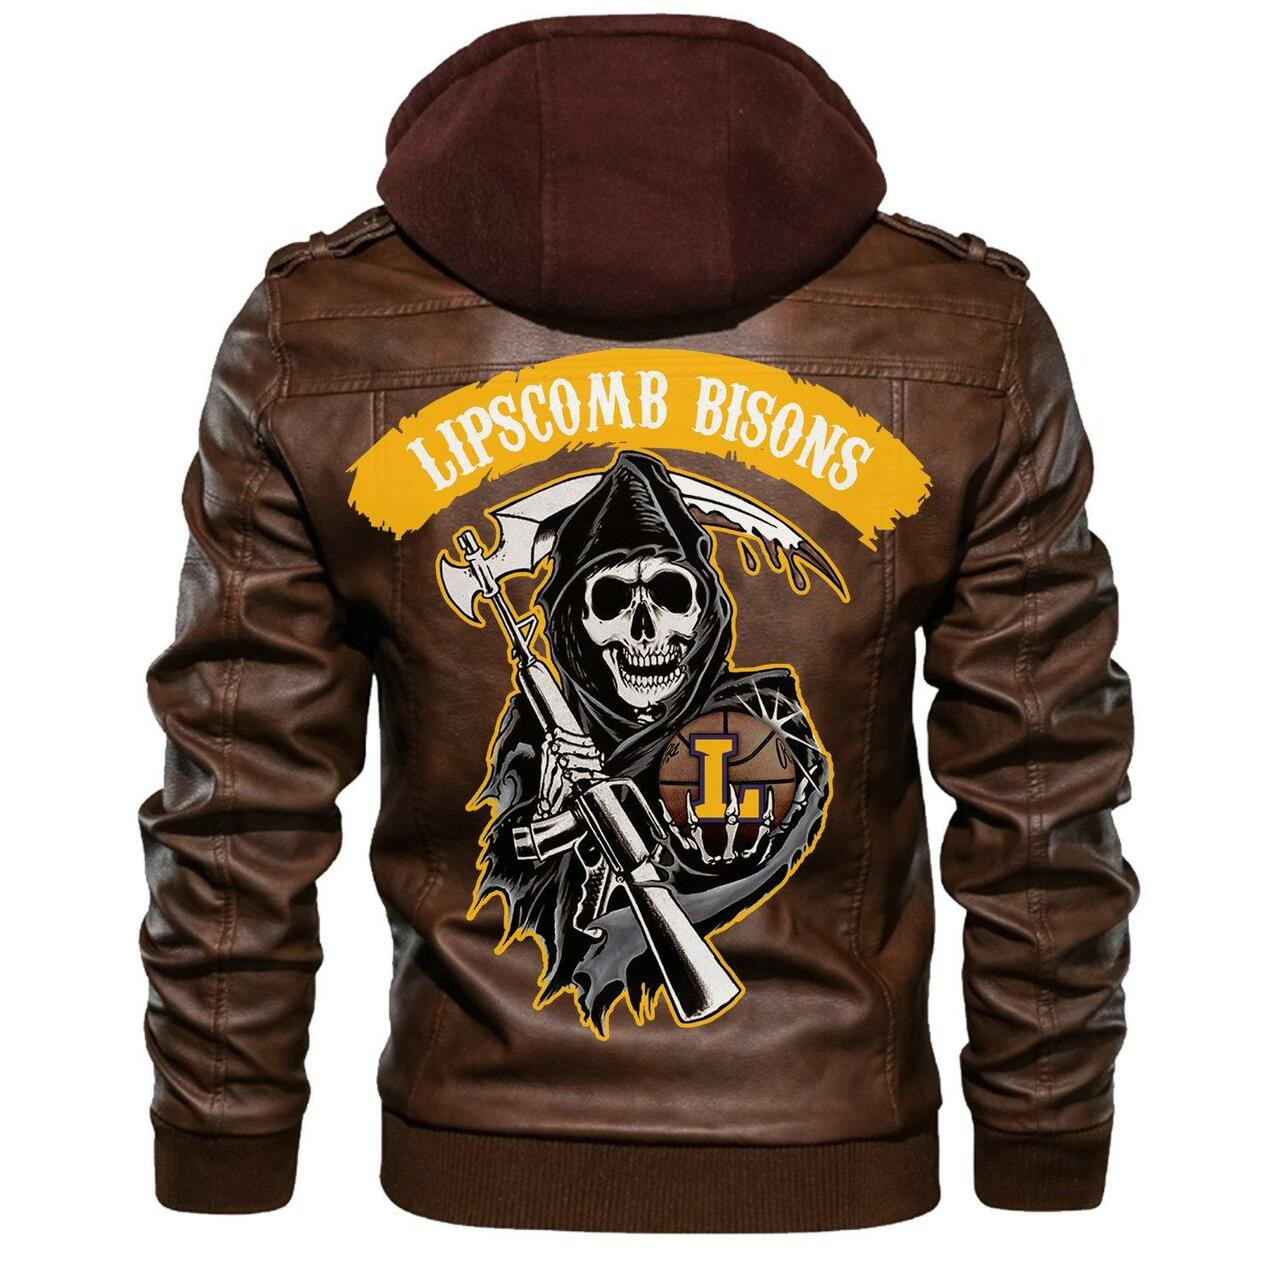 If you're looking for a new leather jacket this season - keep reading! 55